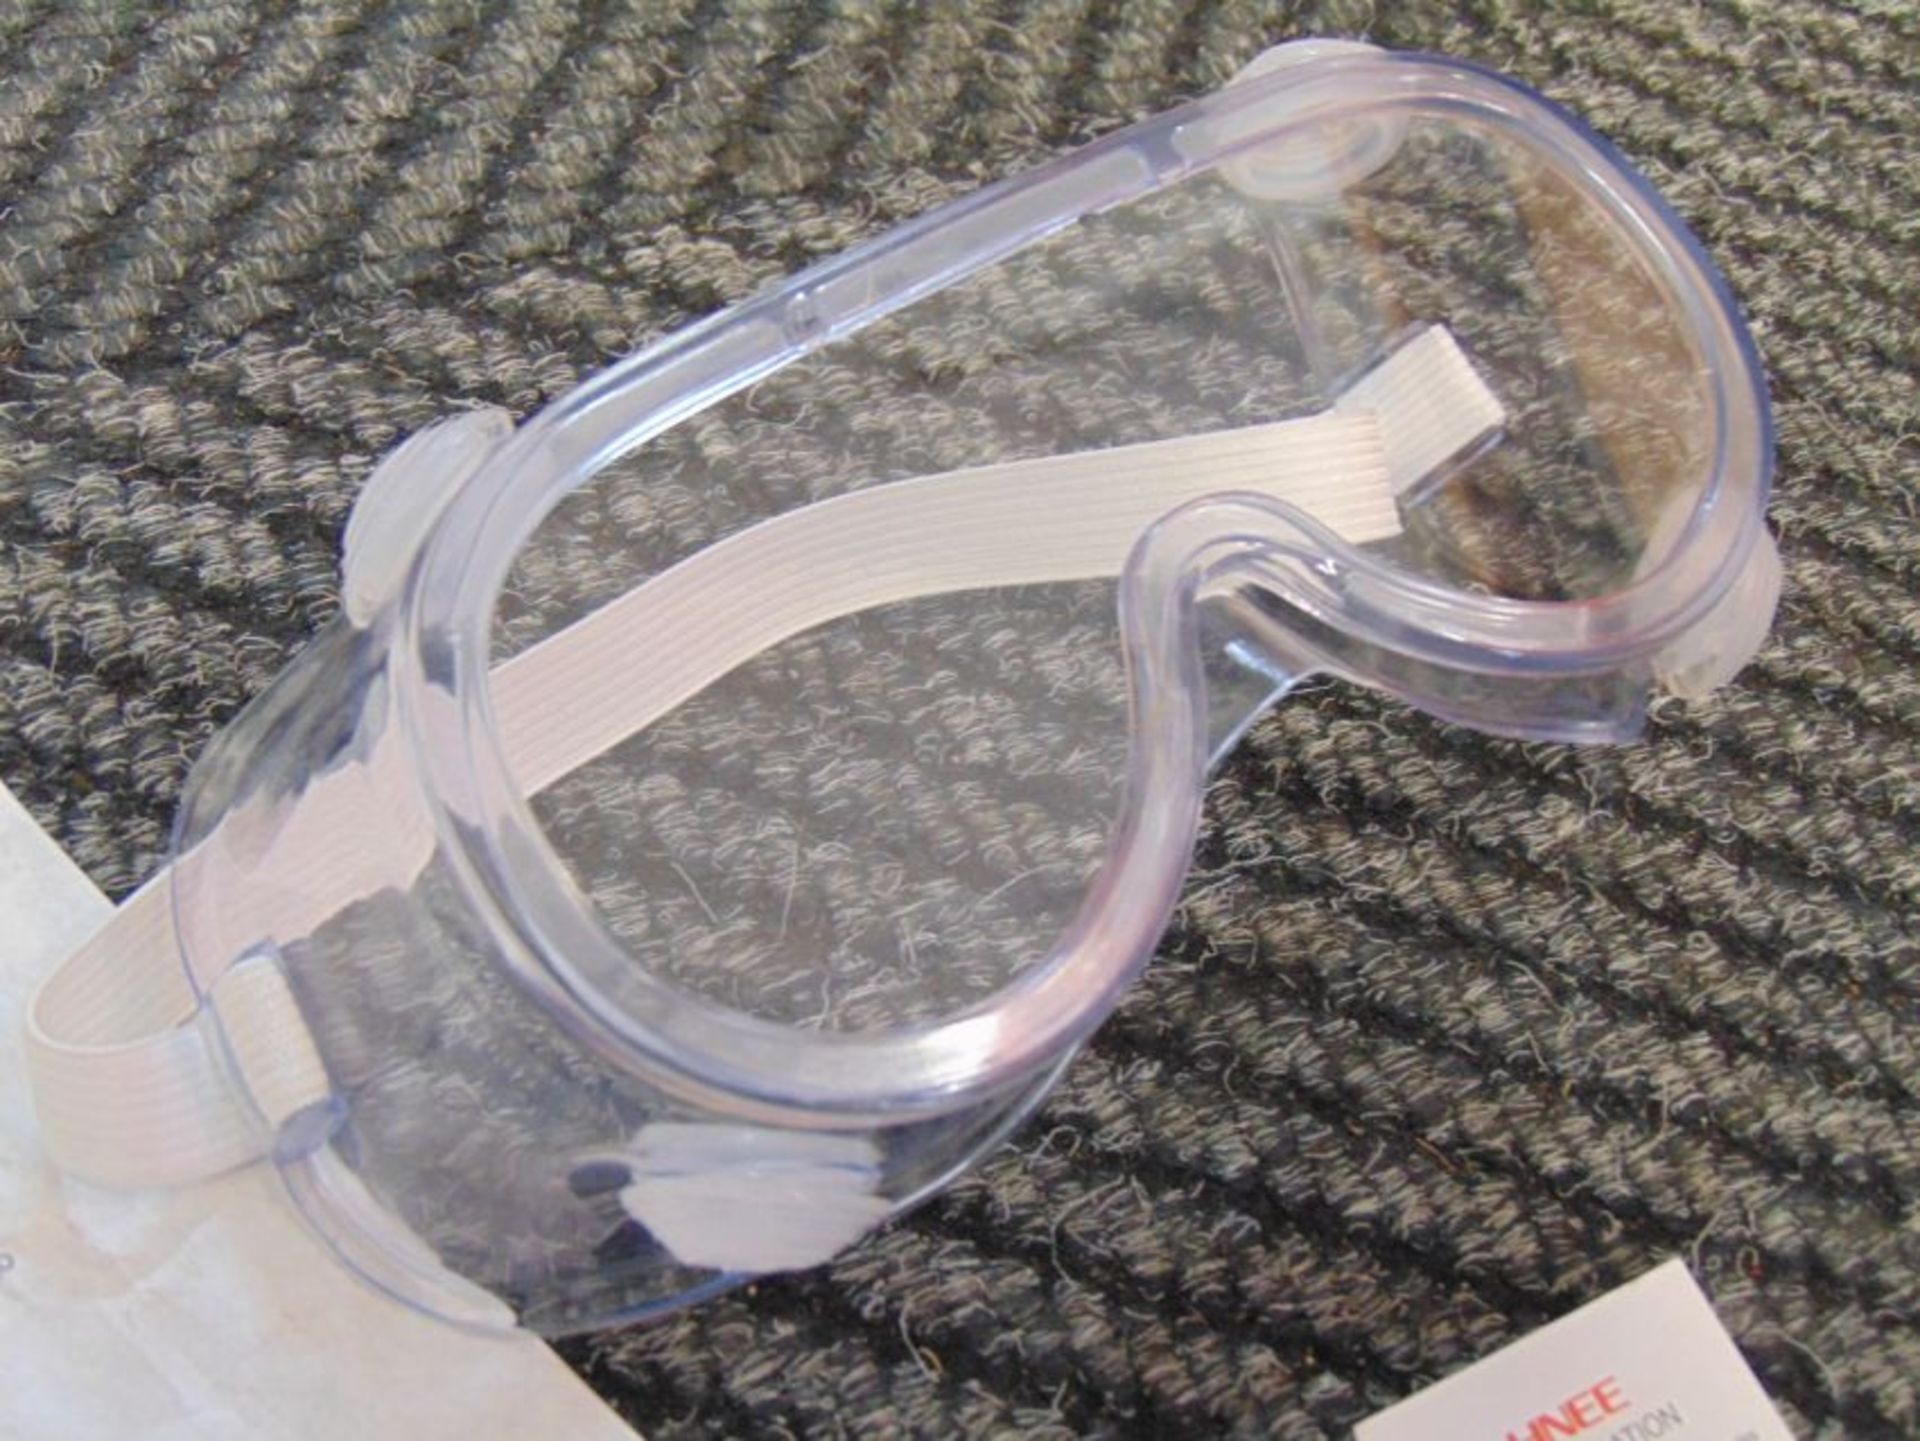 160 x NEW UNISSUED Safety goggles GLYZ1-1 - Image 7 of 15